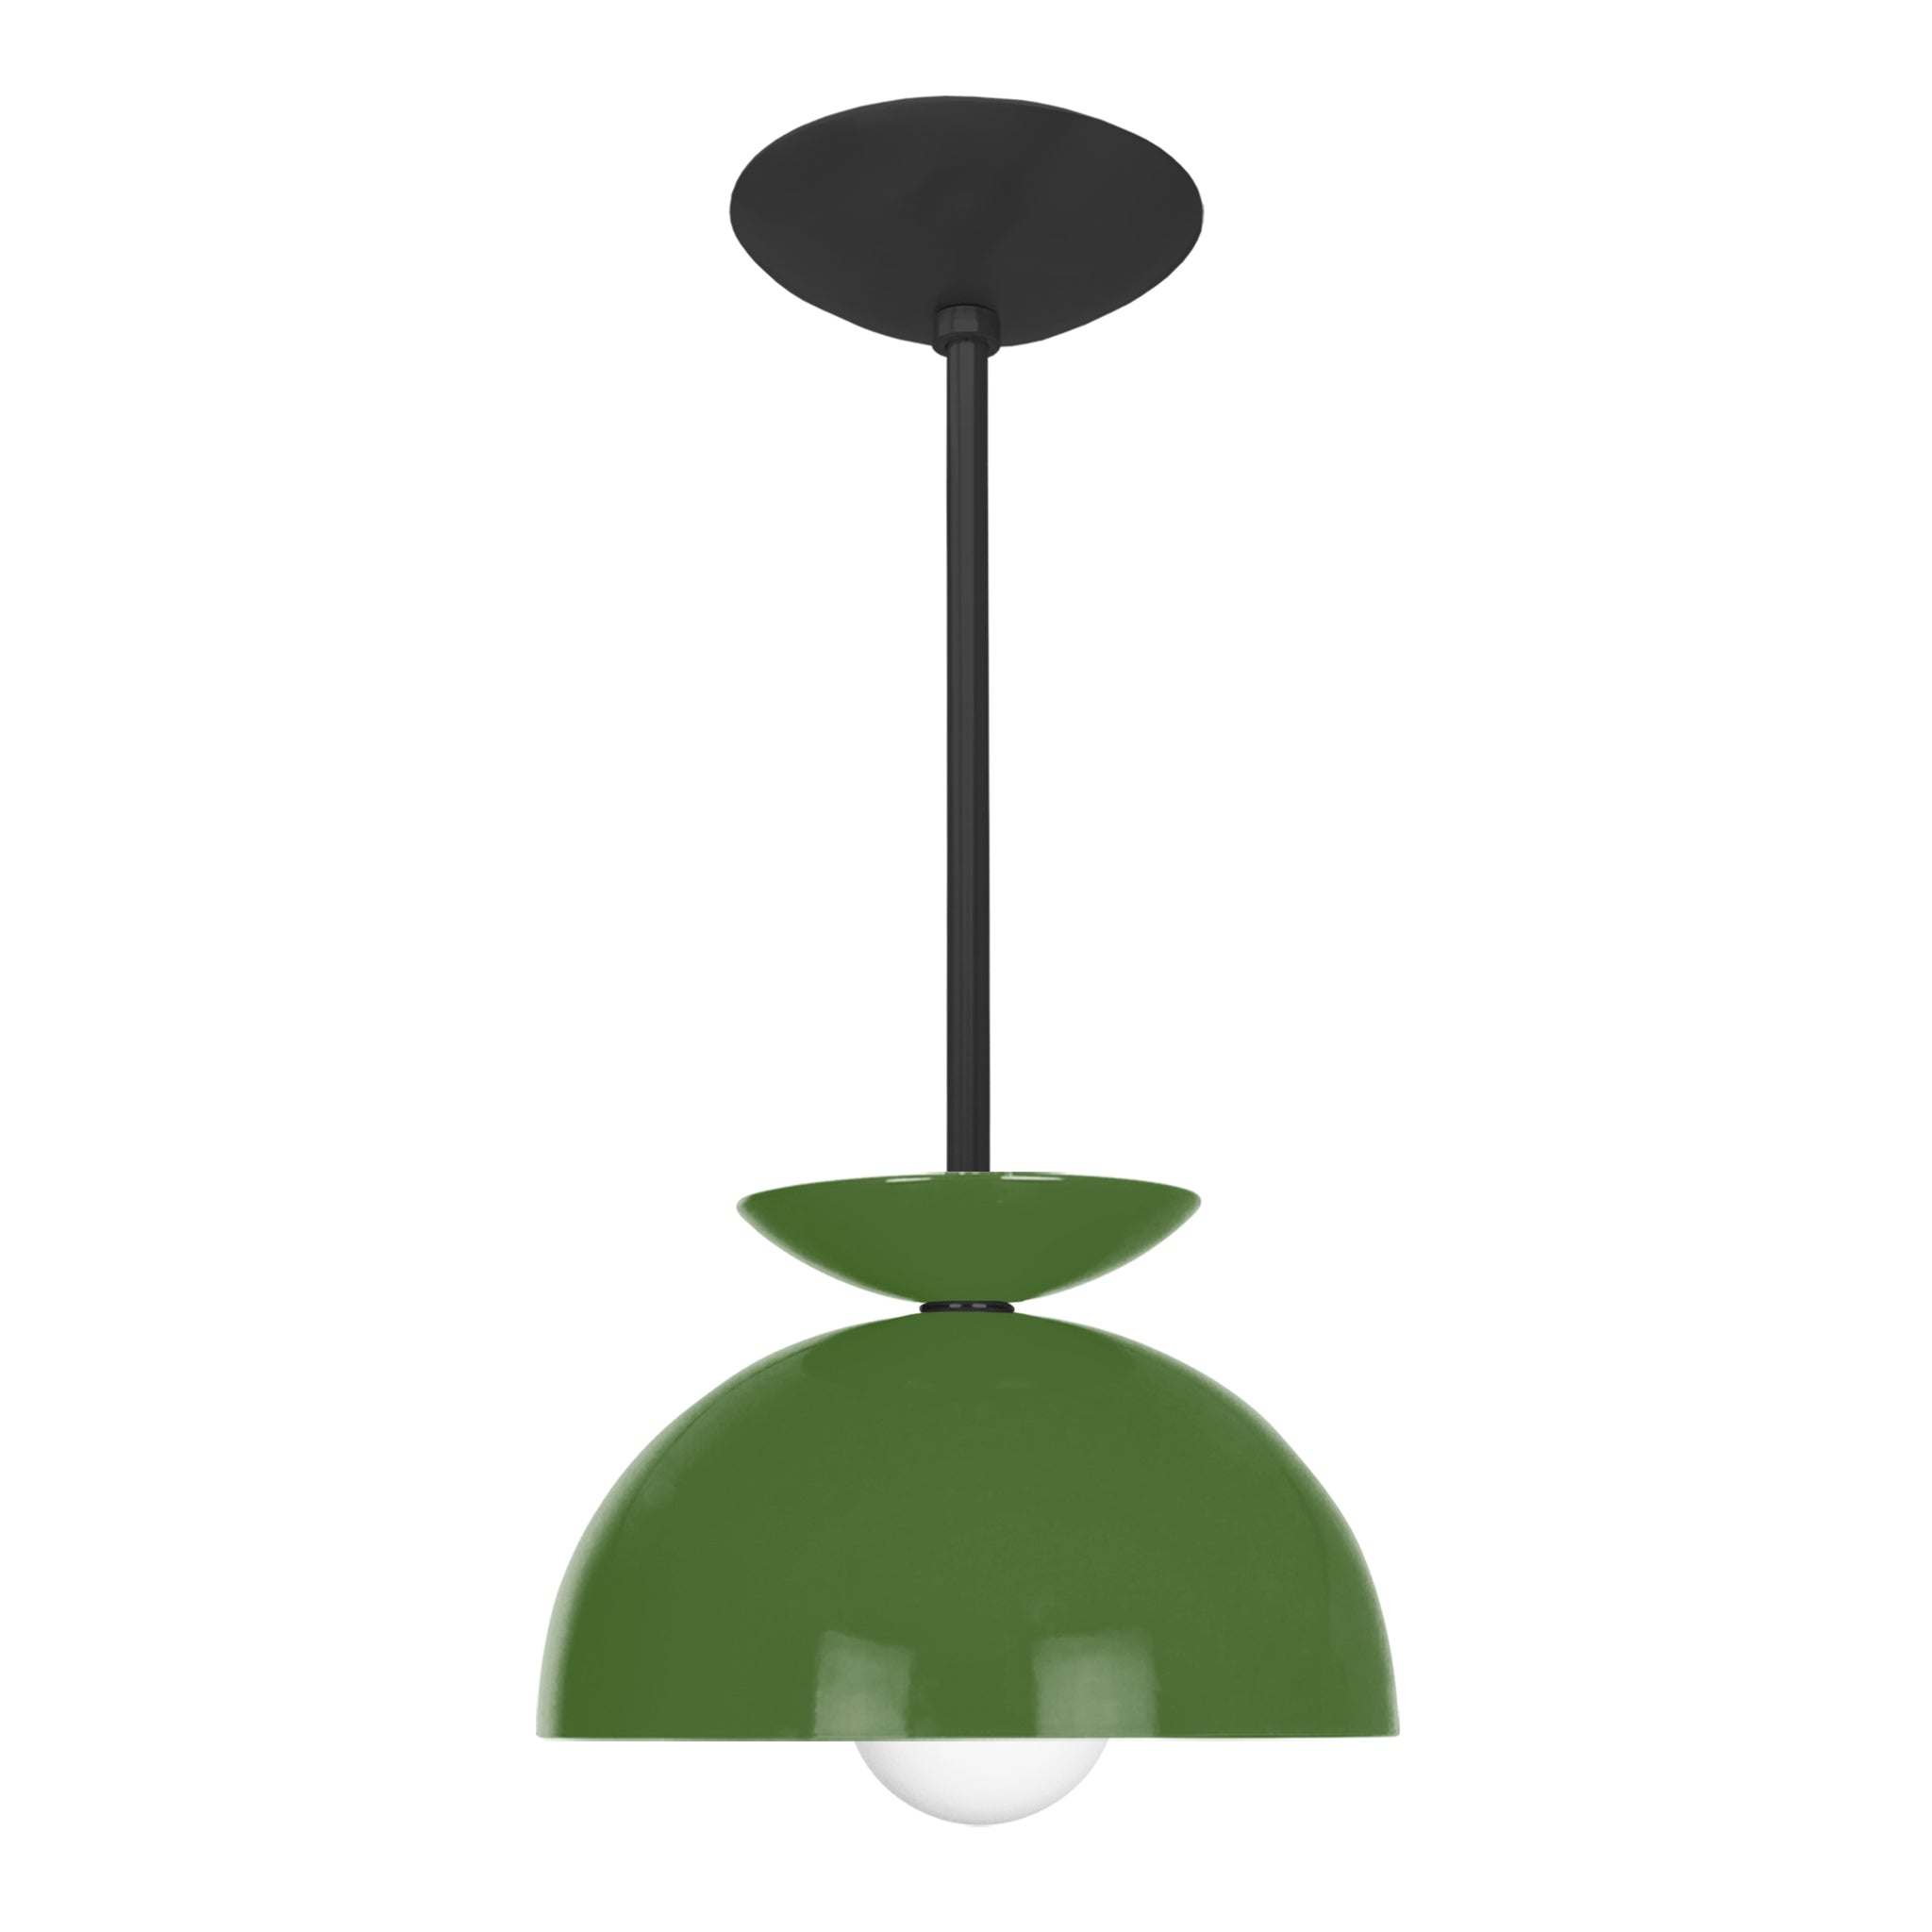 Black and python green color Echo pendant 10" Dutton Brown lighting